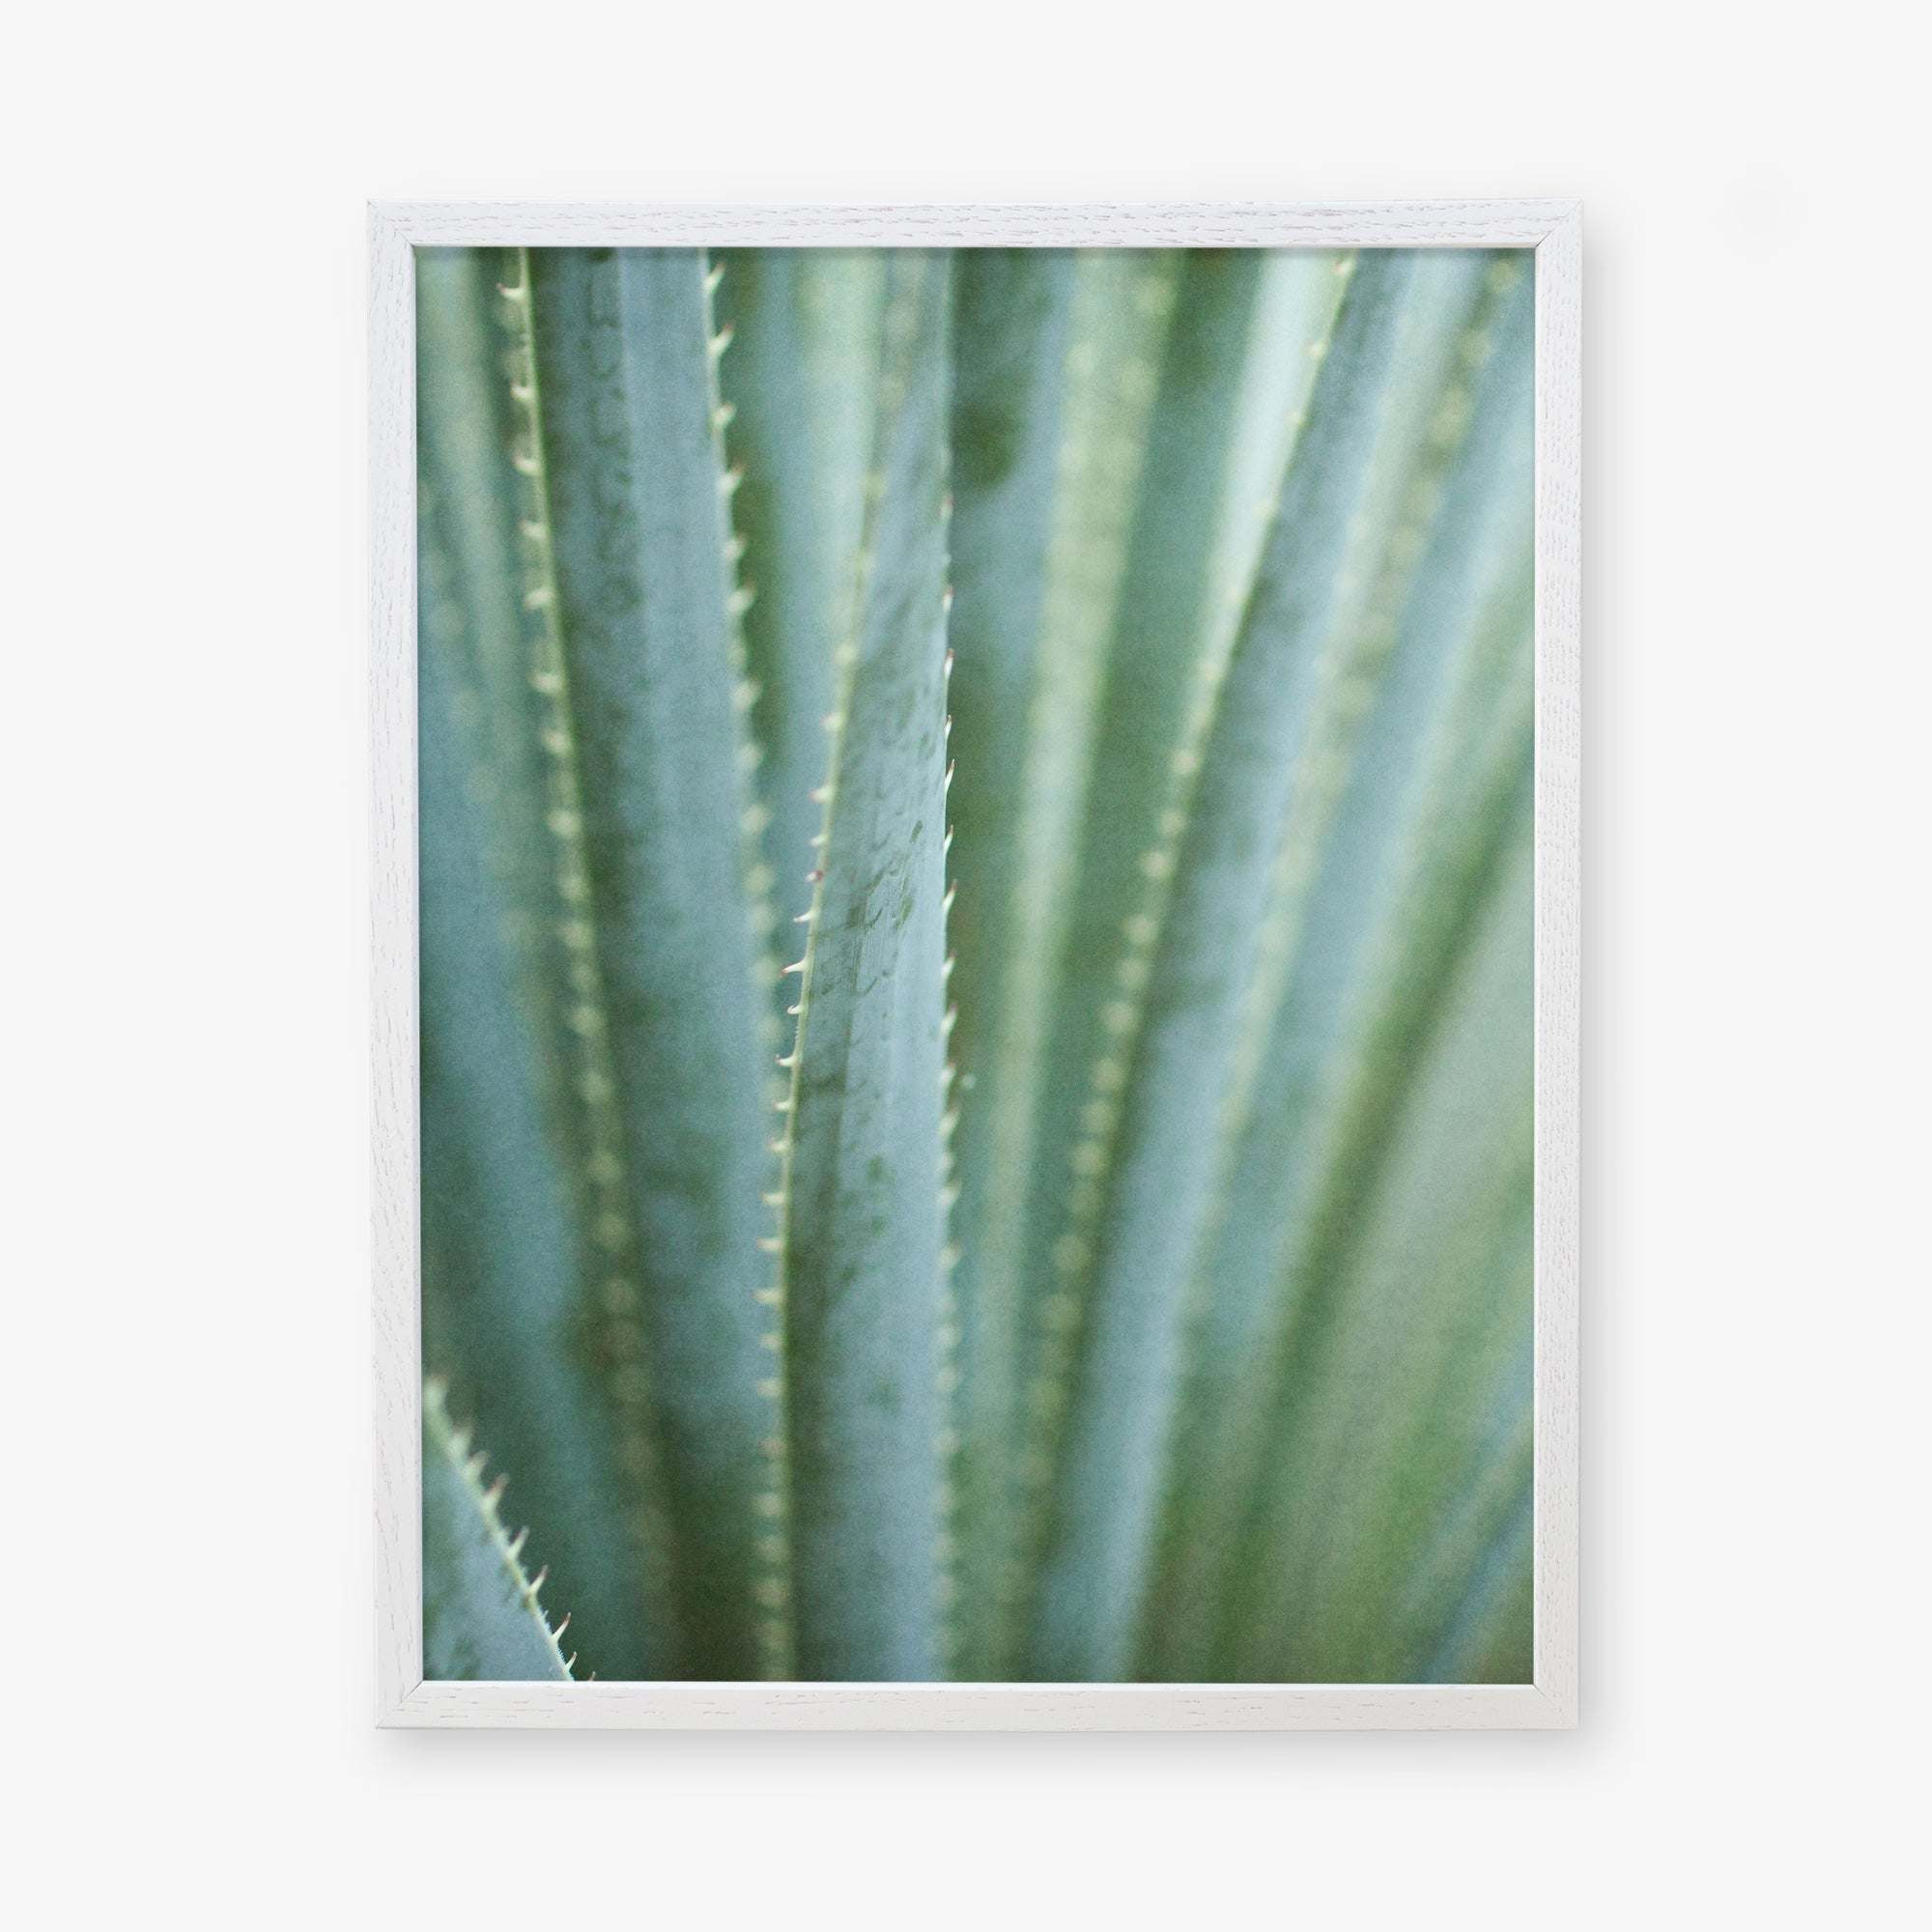 Close-up photo of a green agave plant with sharp, pointed leaves showing detailed textures and spiky edges, framed against a soft, blurred background. This desert plants photography is printed on archival photographic Green Botanical Print, &#39;Strands and Spikes II&#39; by Offley Green.